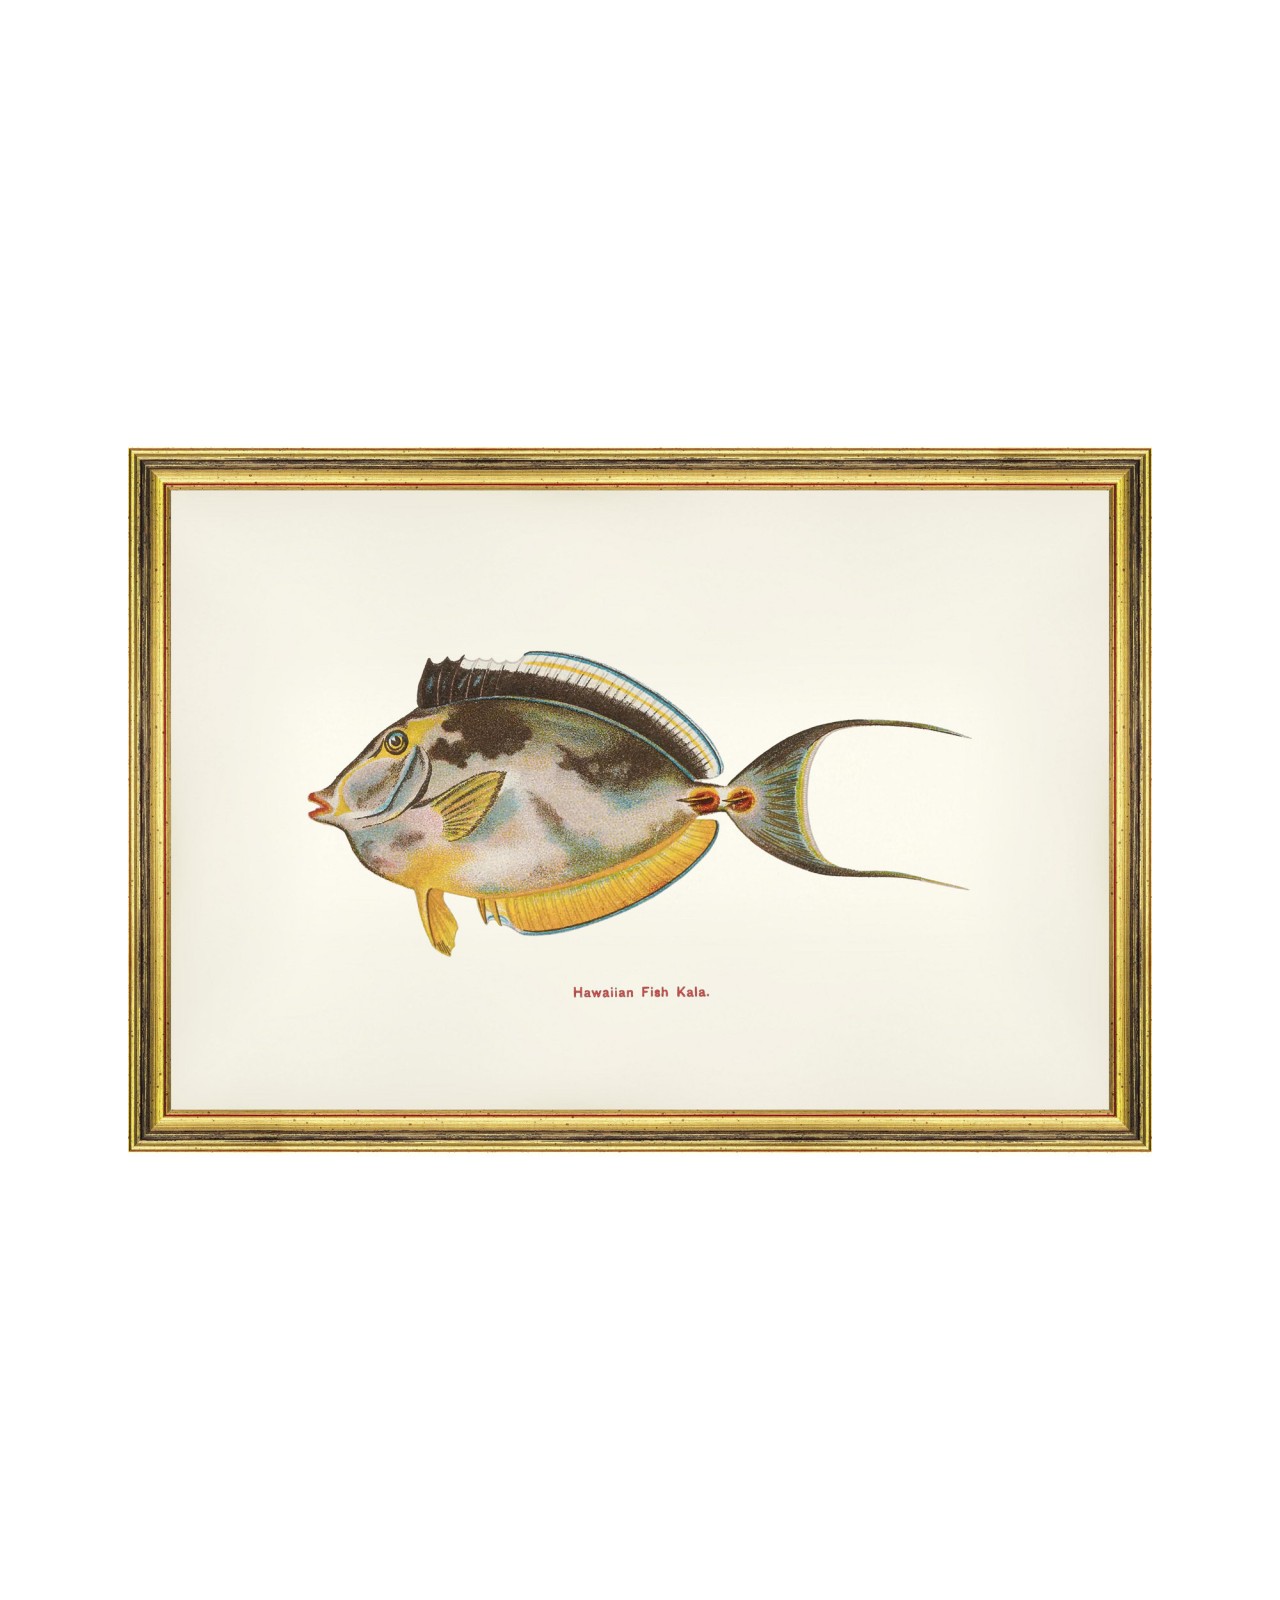 images/productimages/small/kala-fish-60x40cm-glass-size-rama-2490-00.jpg